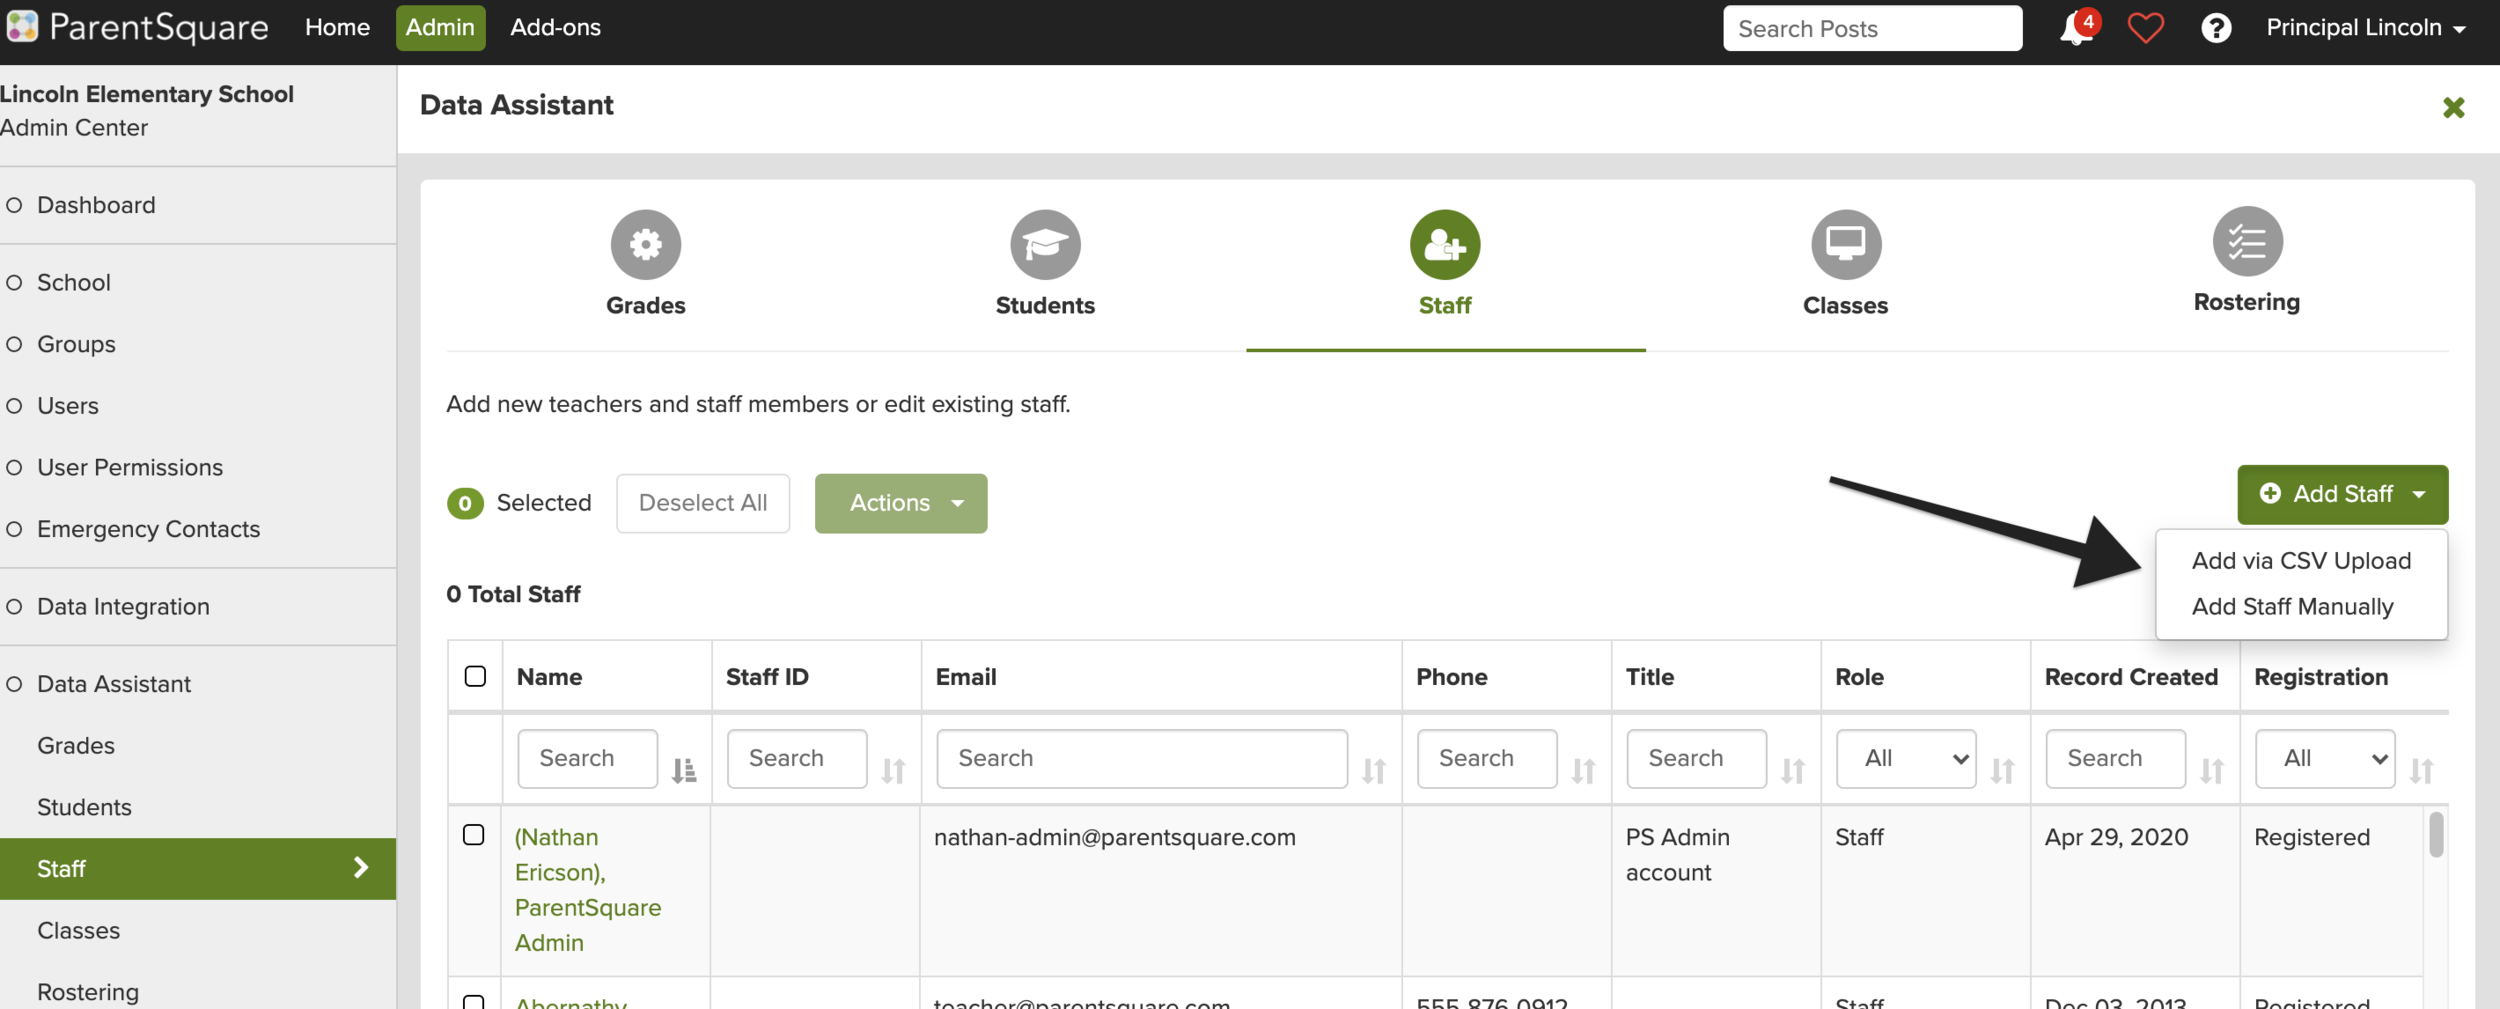 Screenshot showing how to add staff to ParentSquare with a CSV upload